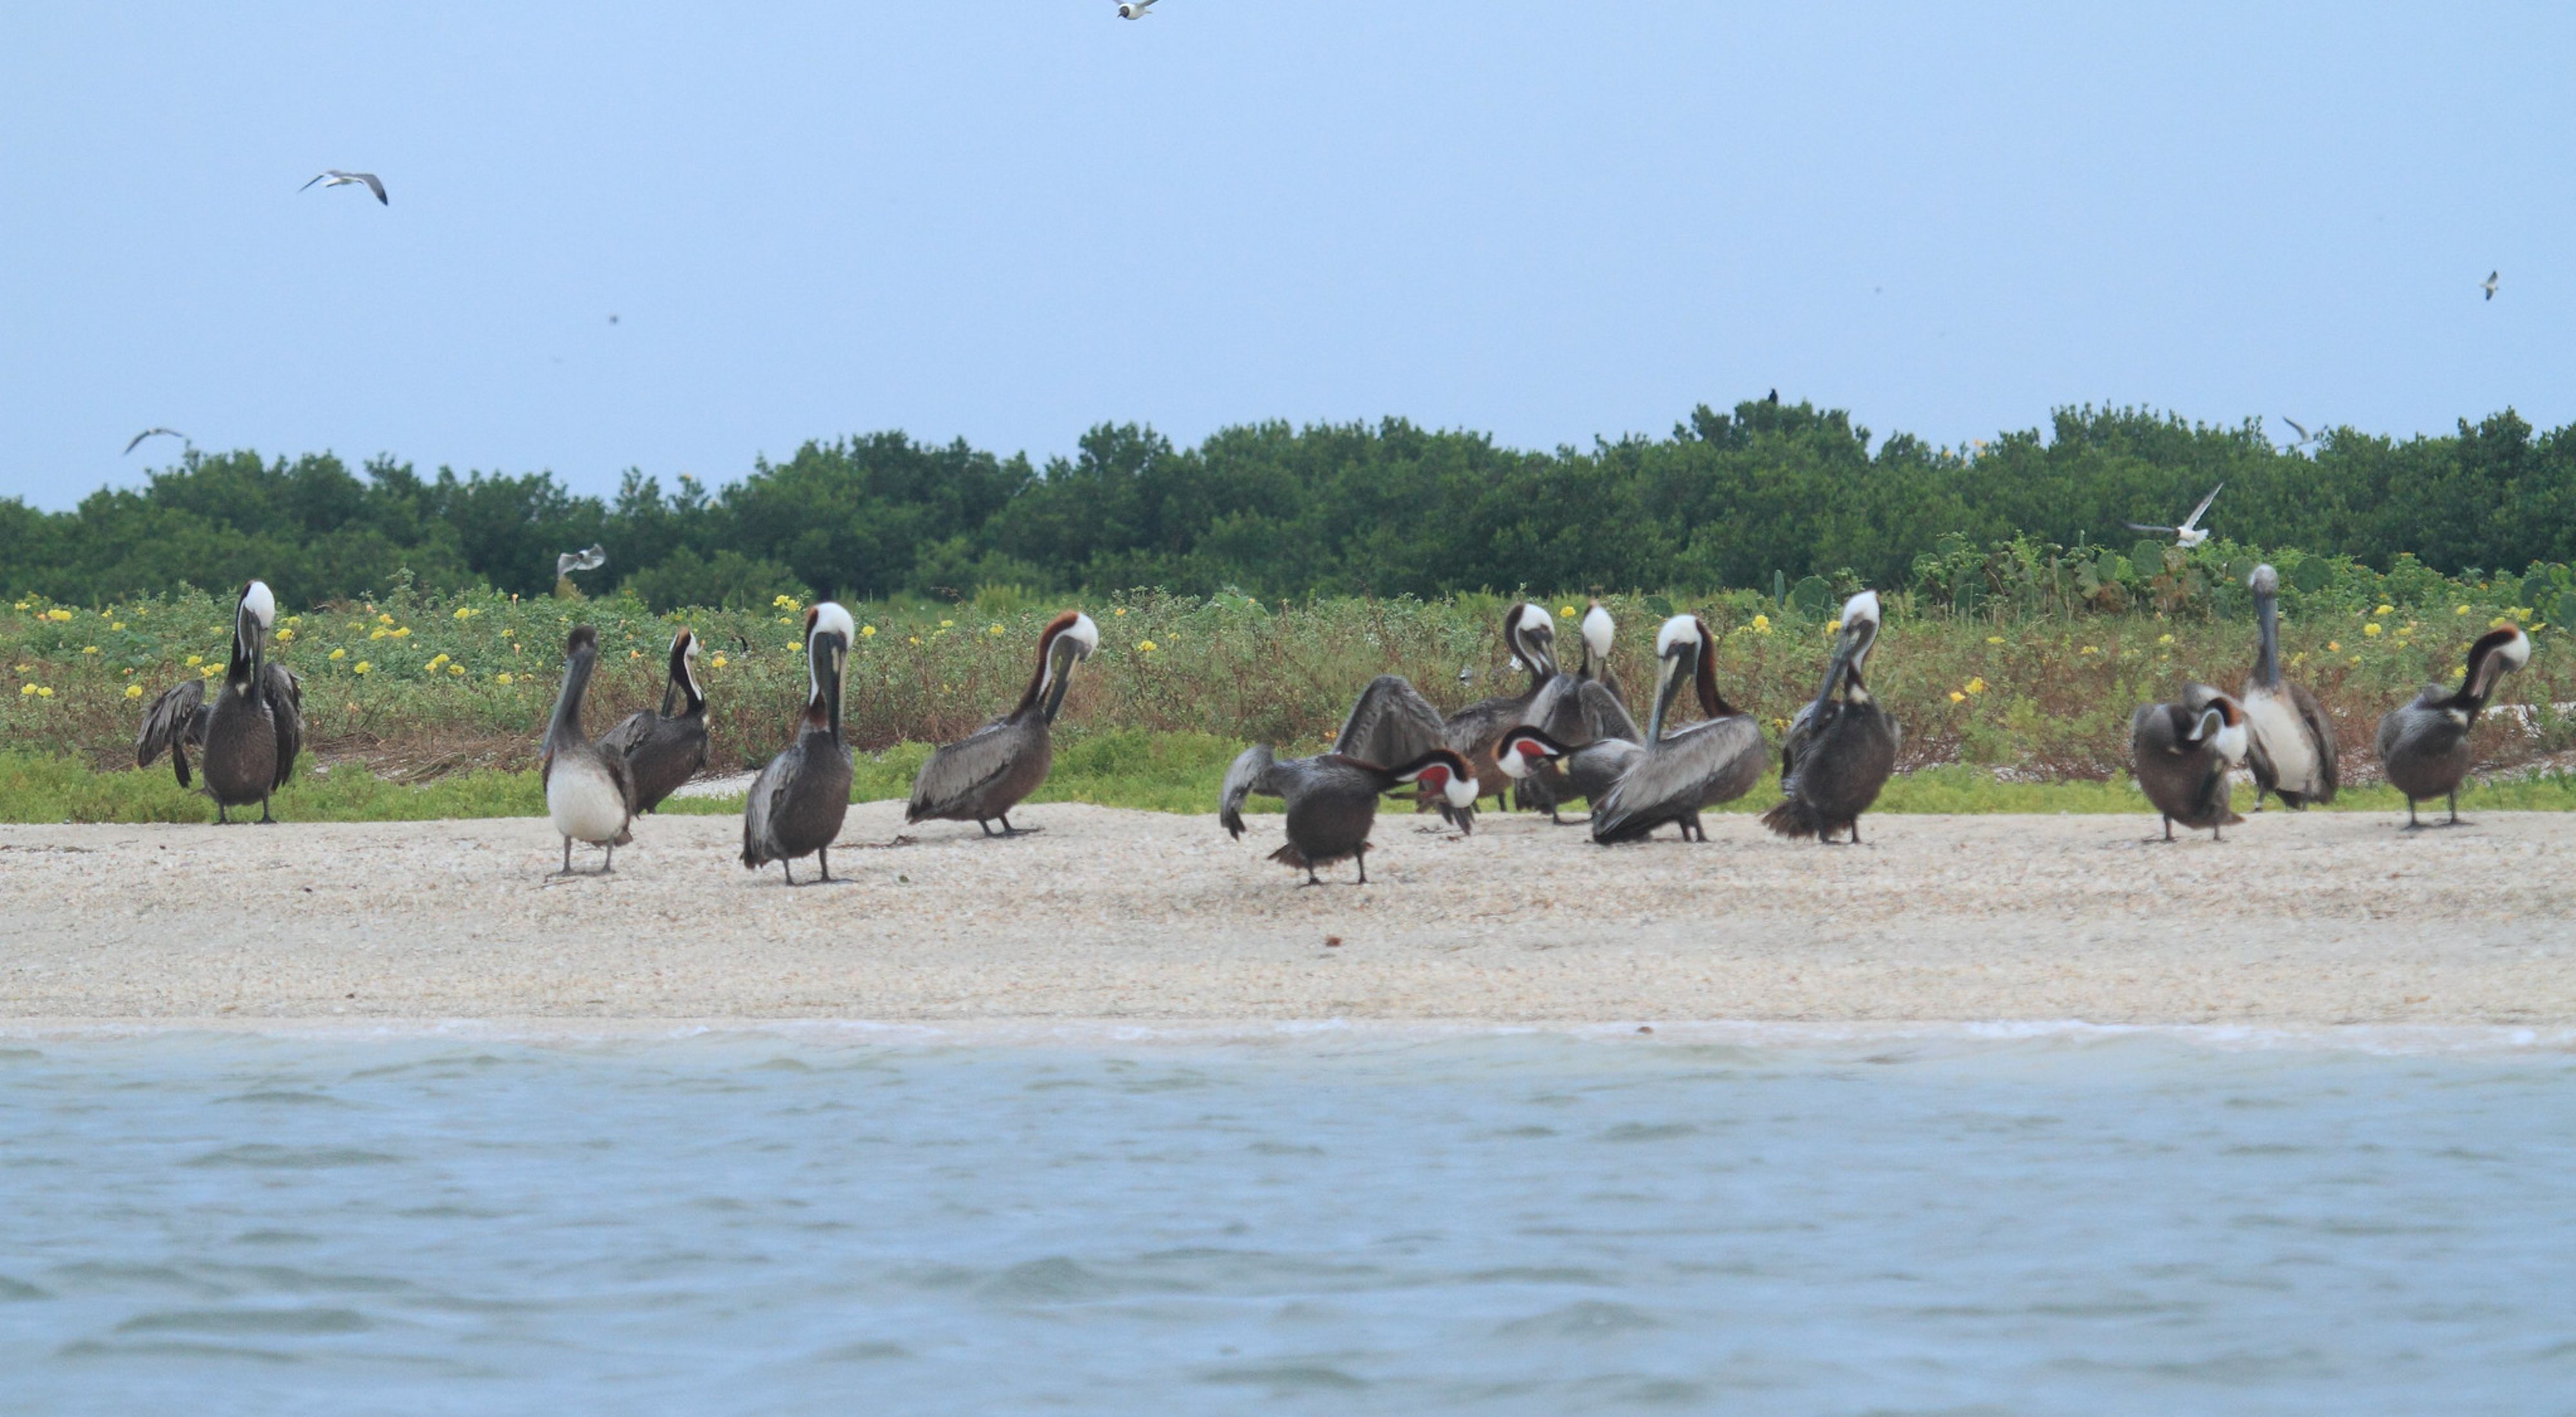 A variety of waterbirds sit on a sandy beach with thick, green brush in the background.